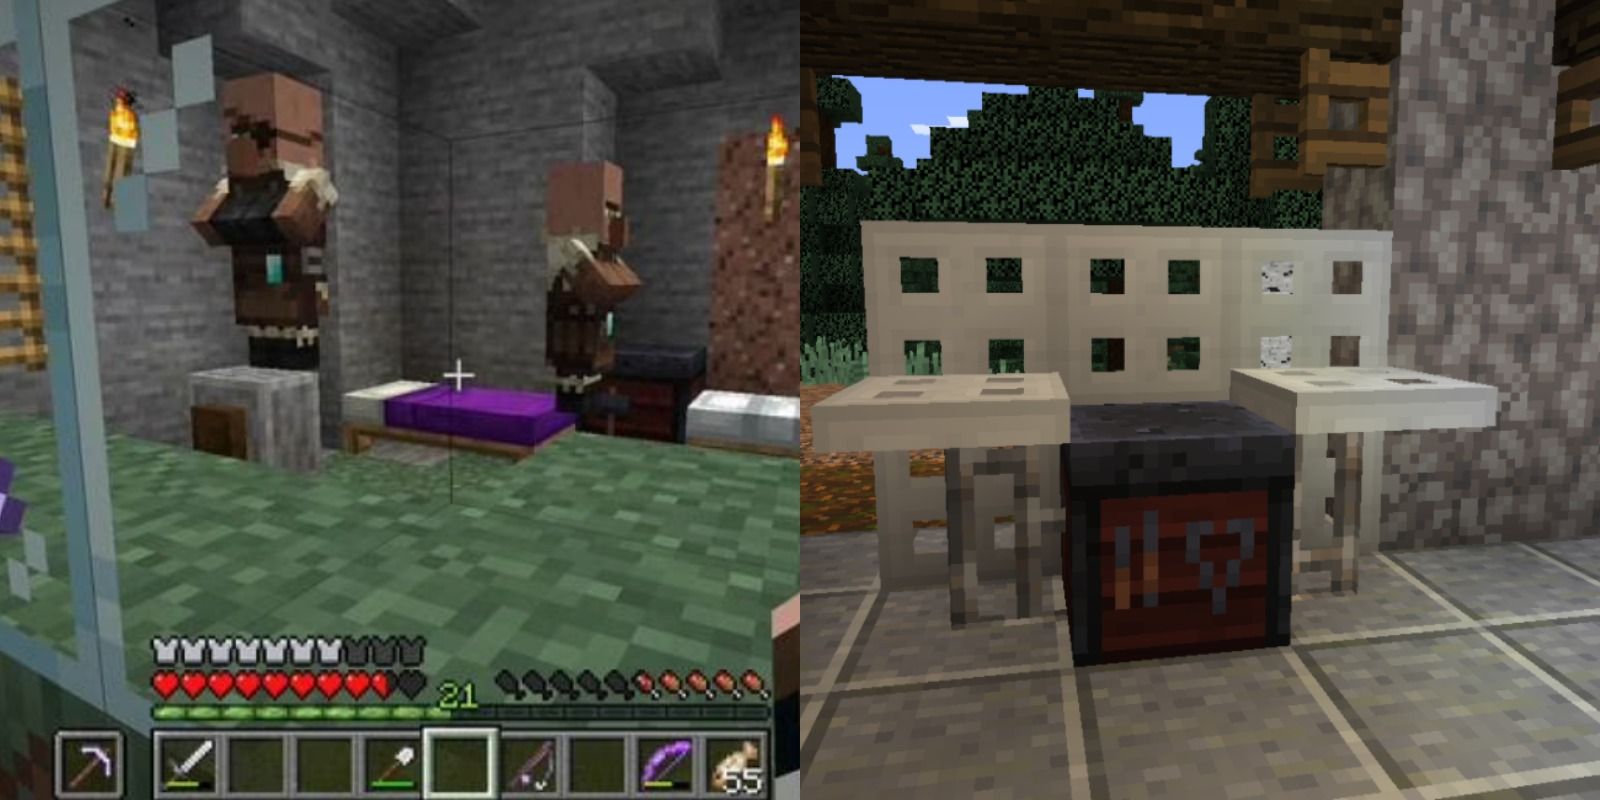 toolsmith villagers and smithing table inside.